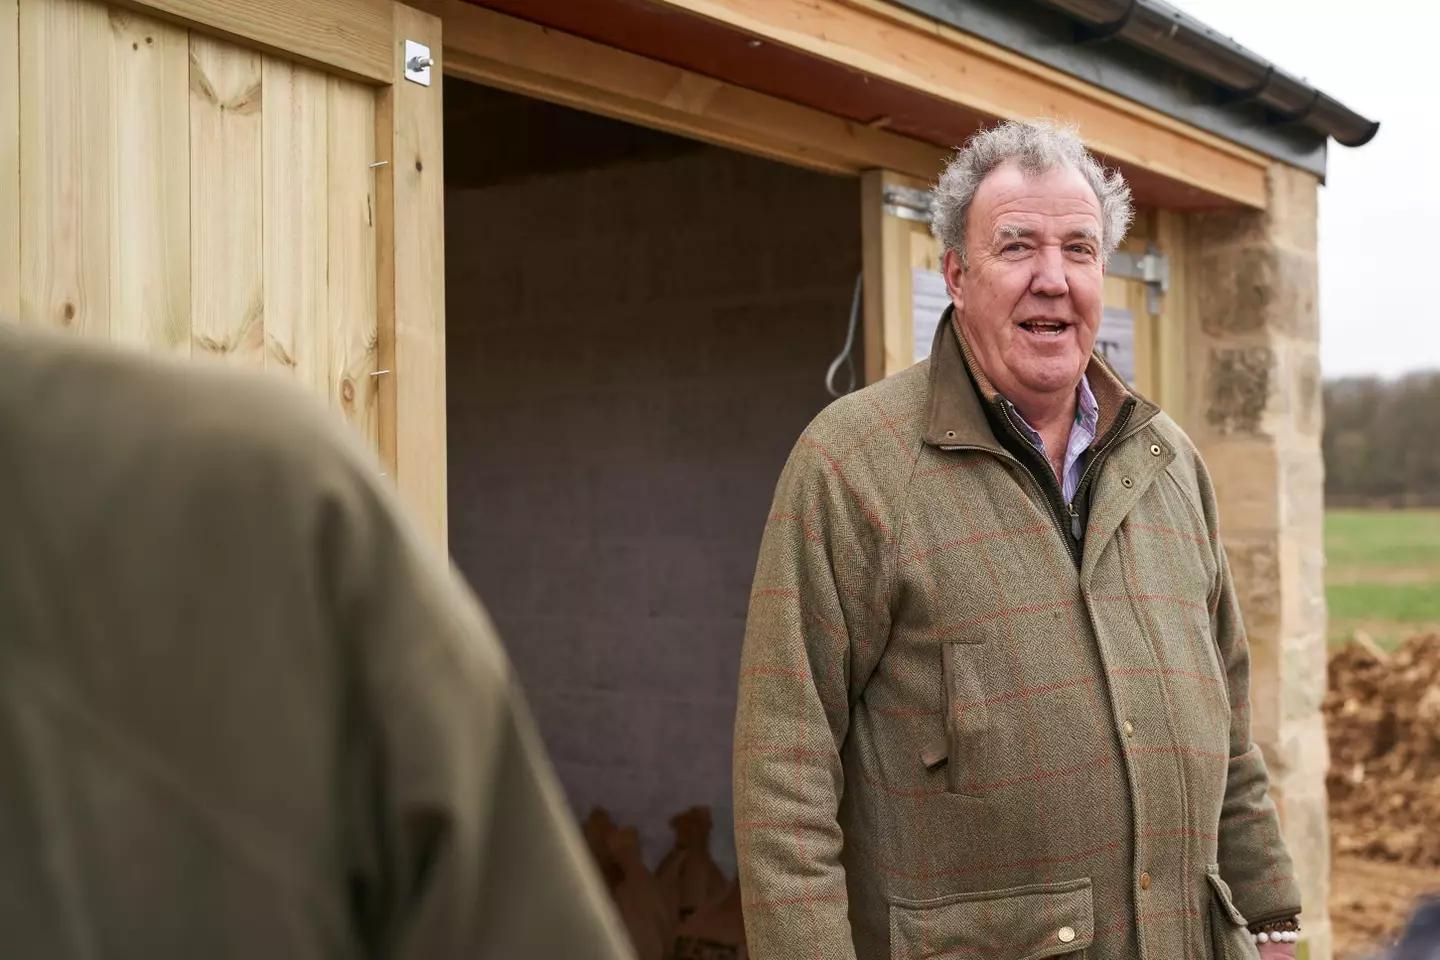 Amazon Prime look set to let Jeremy Clarkson go once his commissioned shows are done.